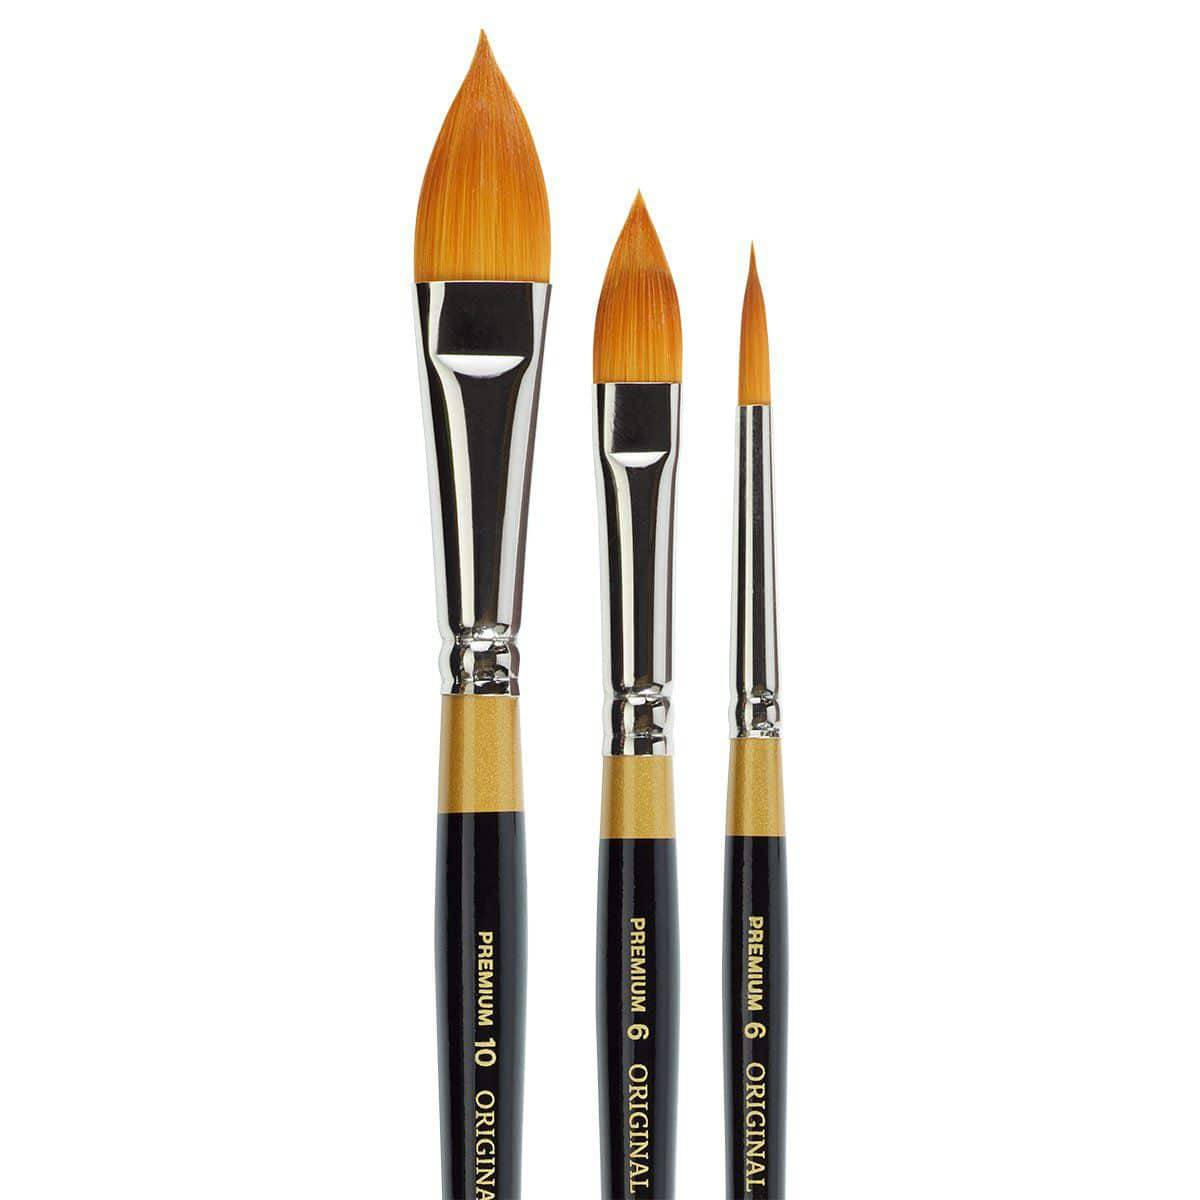 KINGART® Radiant™ Series Premium Golden Synthetic Brushes for Acrylic, Oil  and Watercolor, Gift Box, Set of 12, KINGART